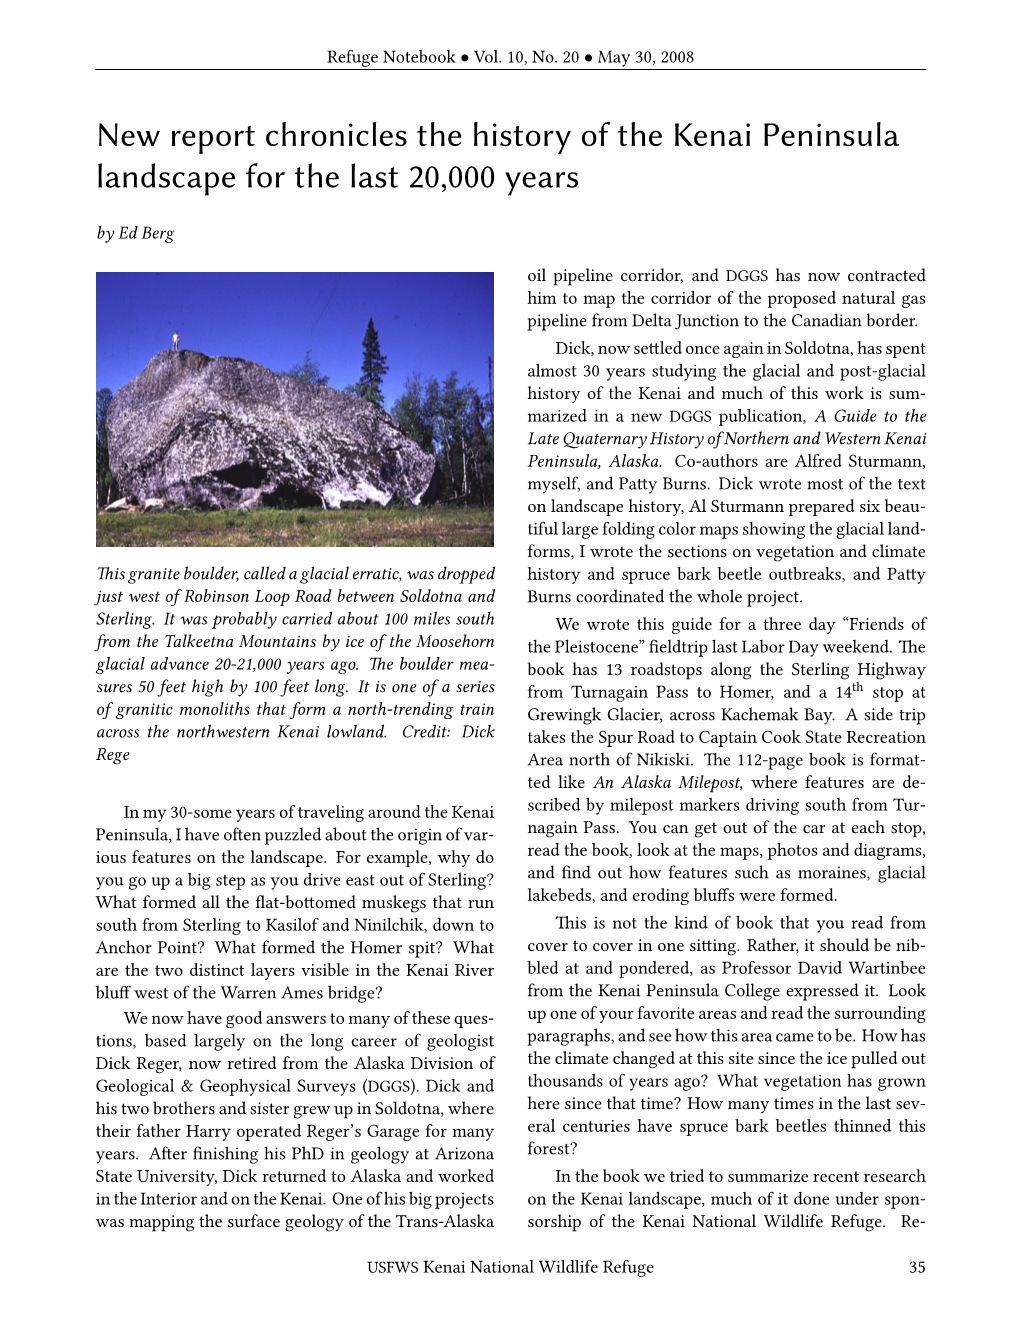 New Report Chronicles the History of the Kenai Peninsula Landscape for the Last 20,000 Years by Ed Berg